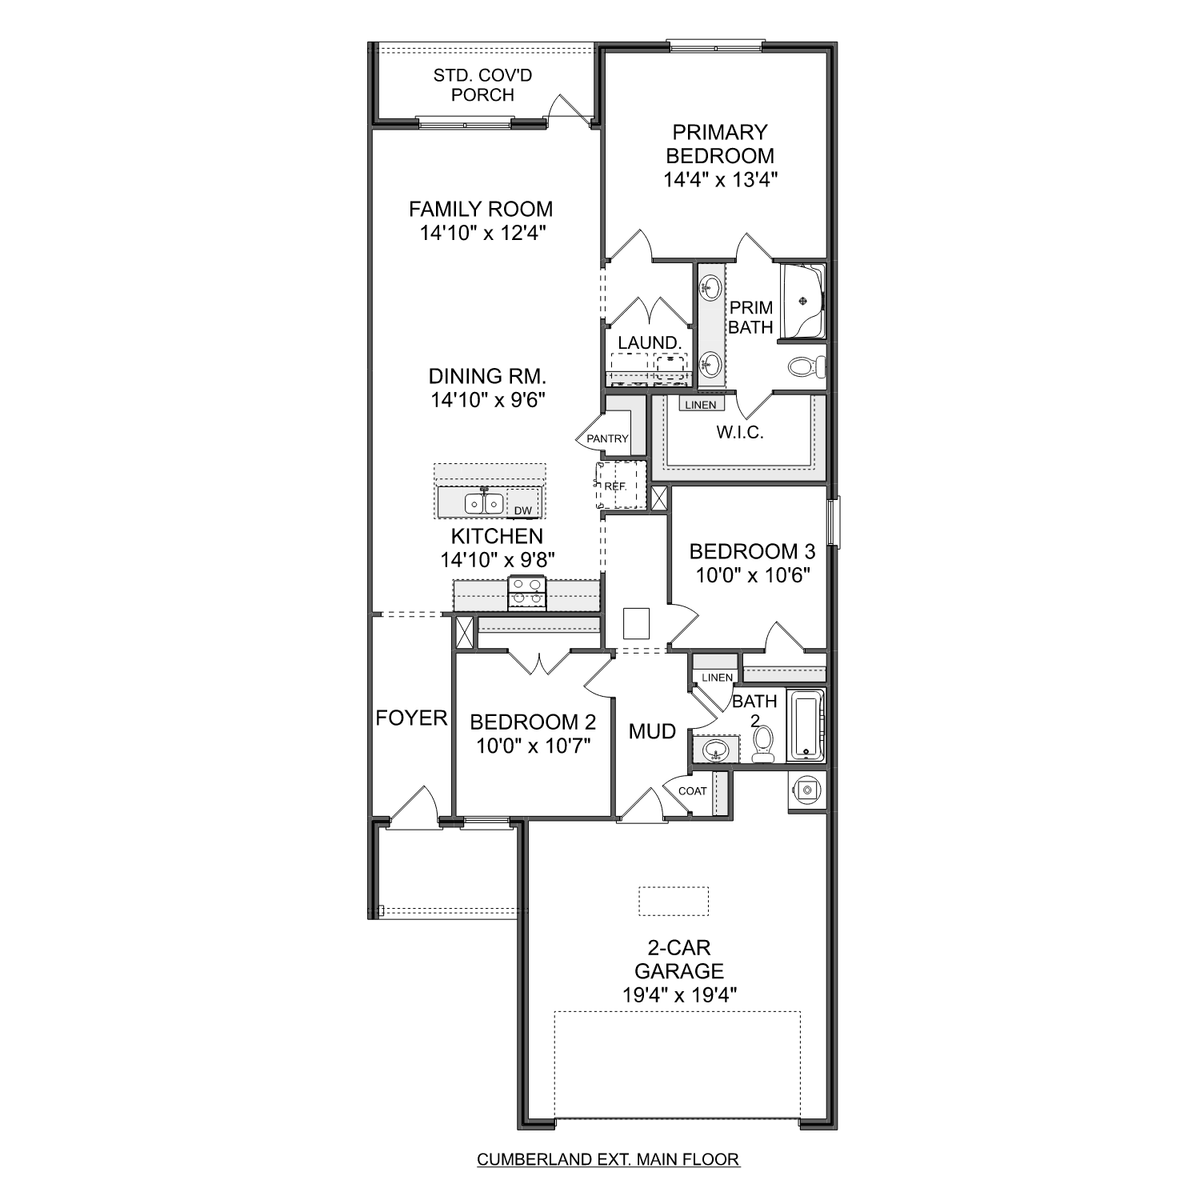 1 - The Cumberland B floor plan layout for 3141 Lea Lane SE in Davidson Homes' Hollon Meadow community.